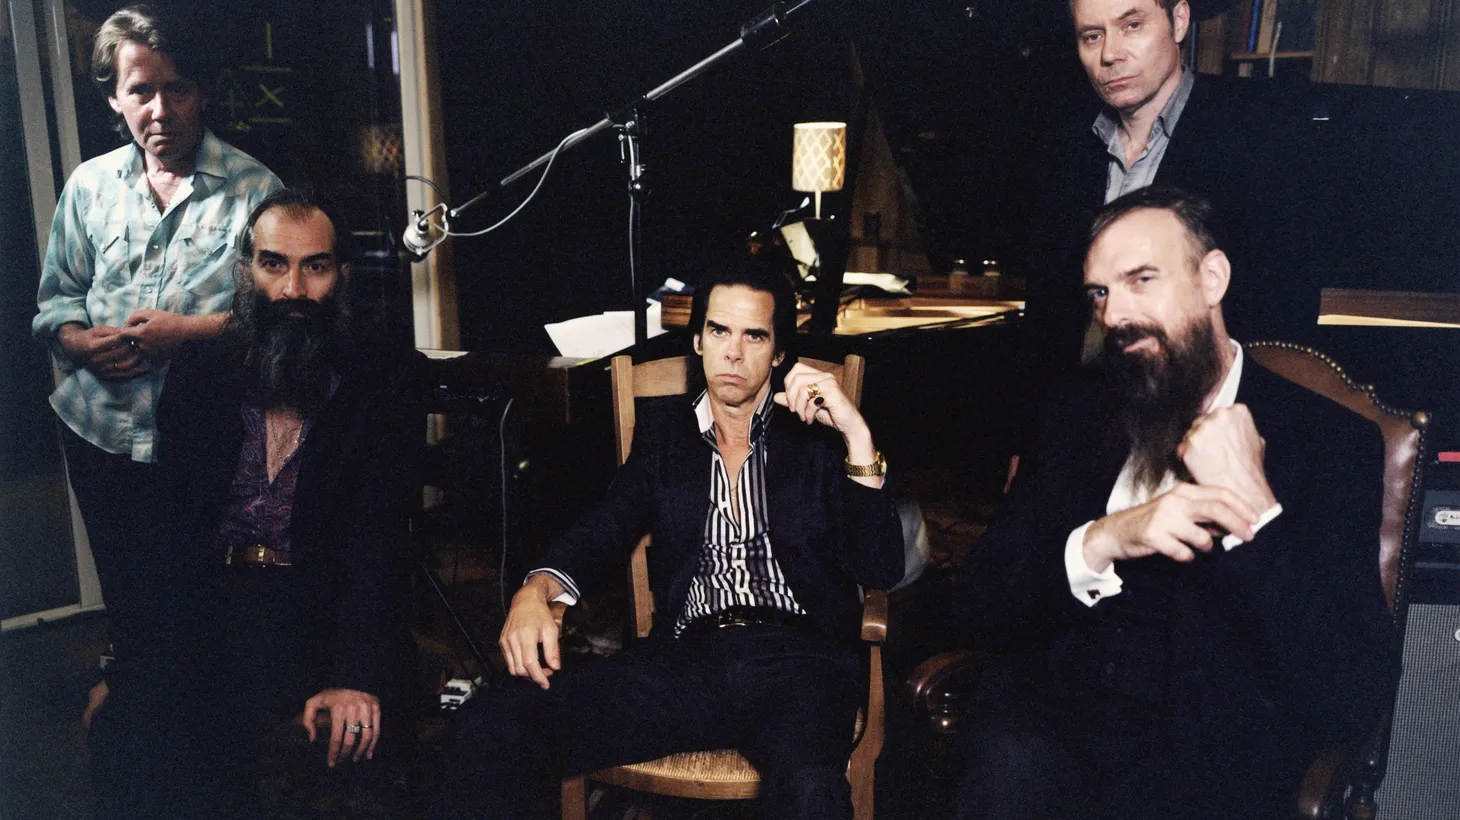 Literary, brooding songster Nick Cave comes in with his band for a session on Morning Becomes Eclectic at 11:15am.Click HERE to watch!